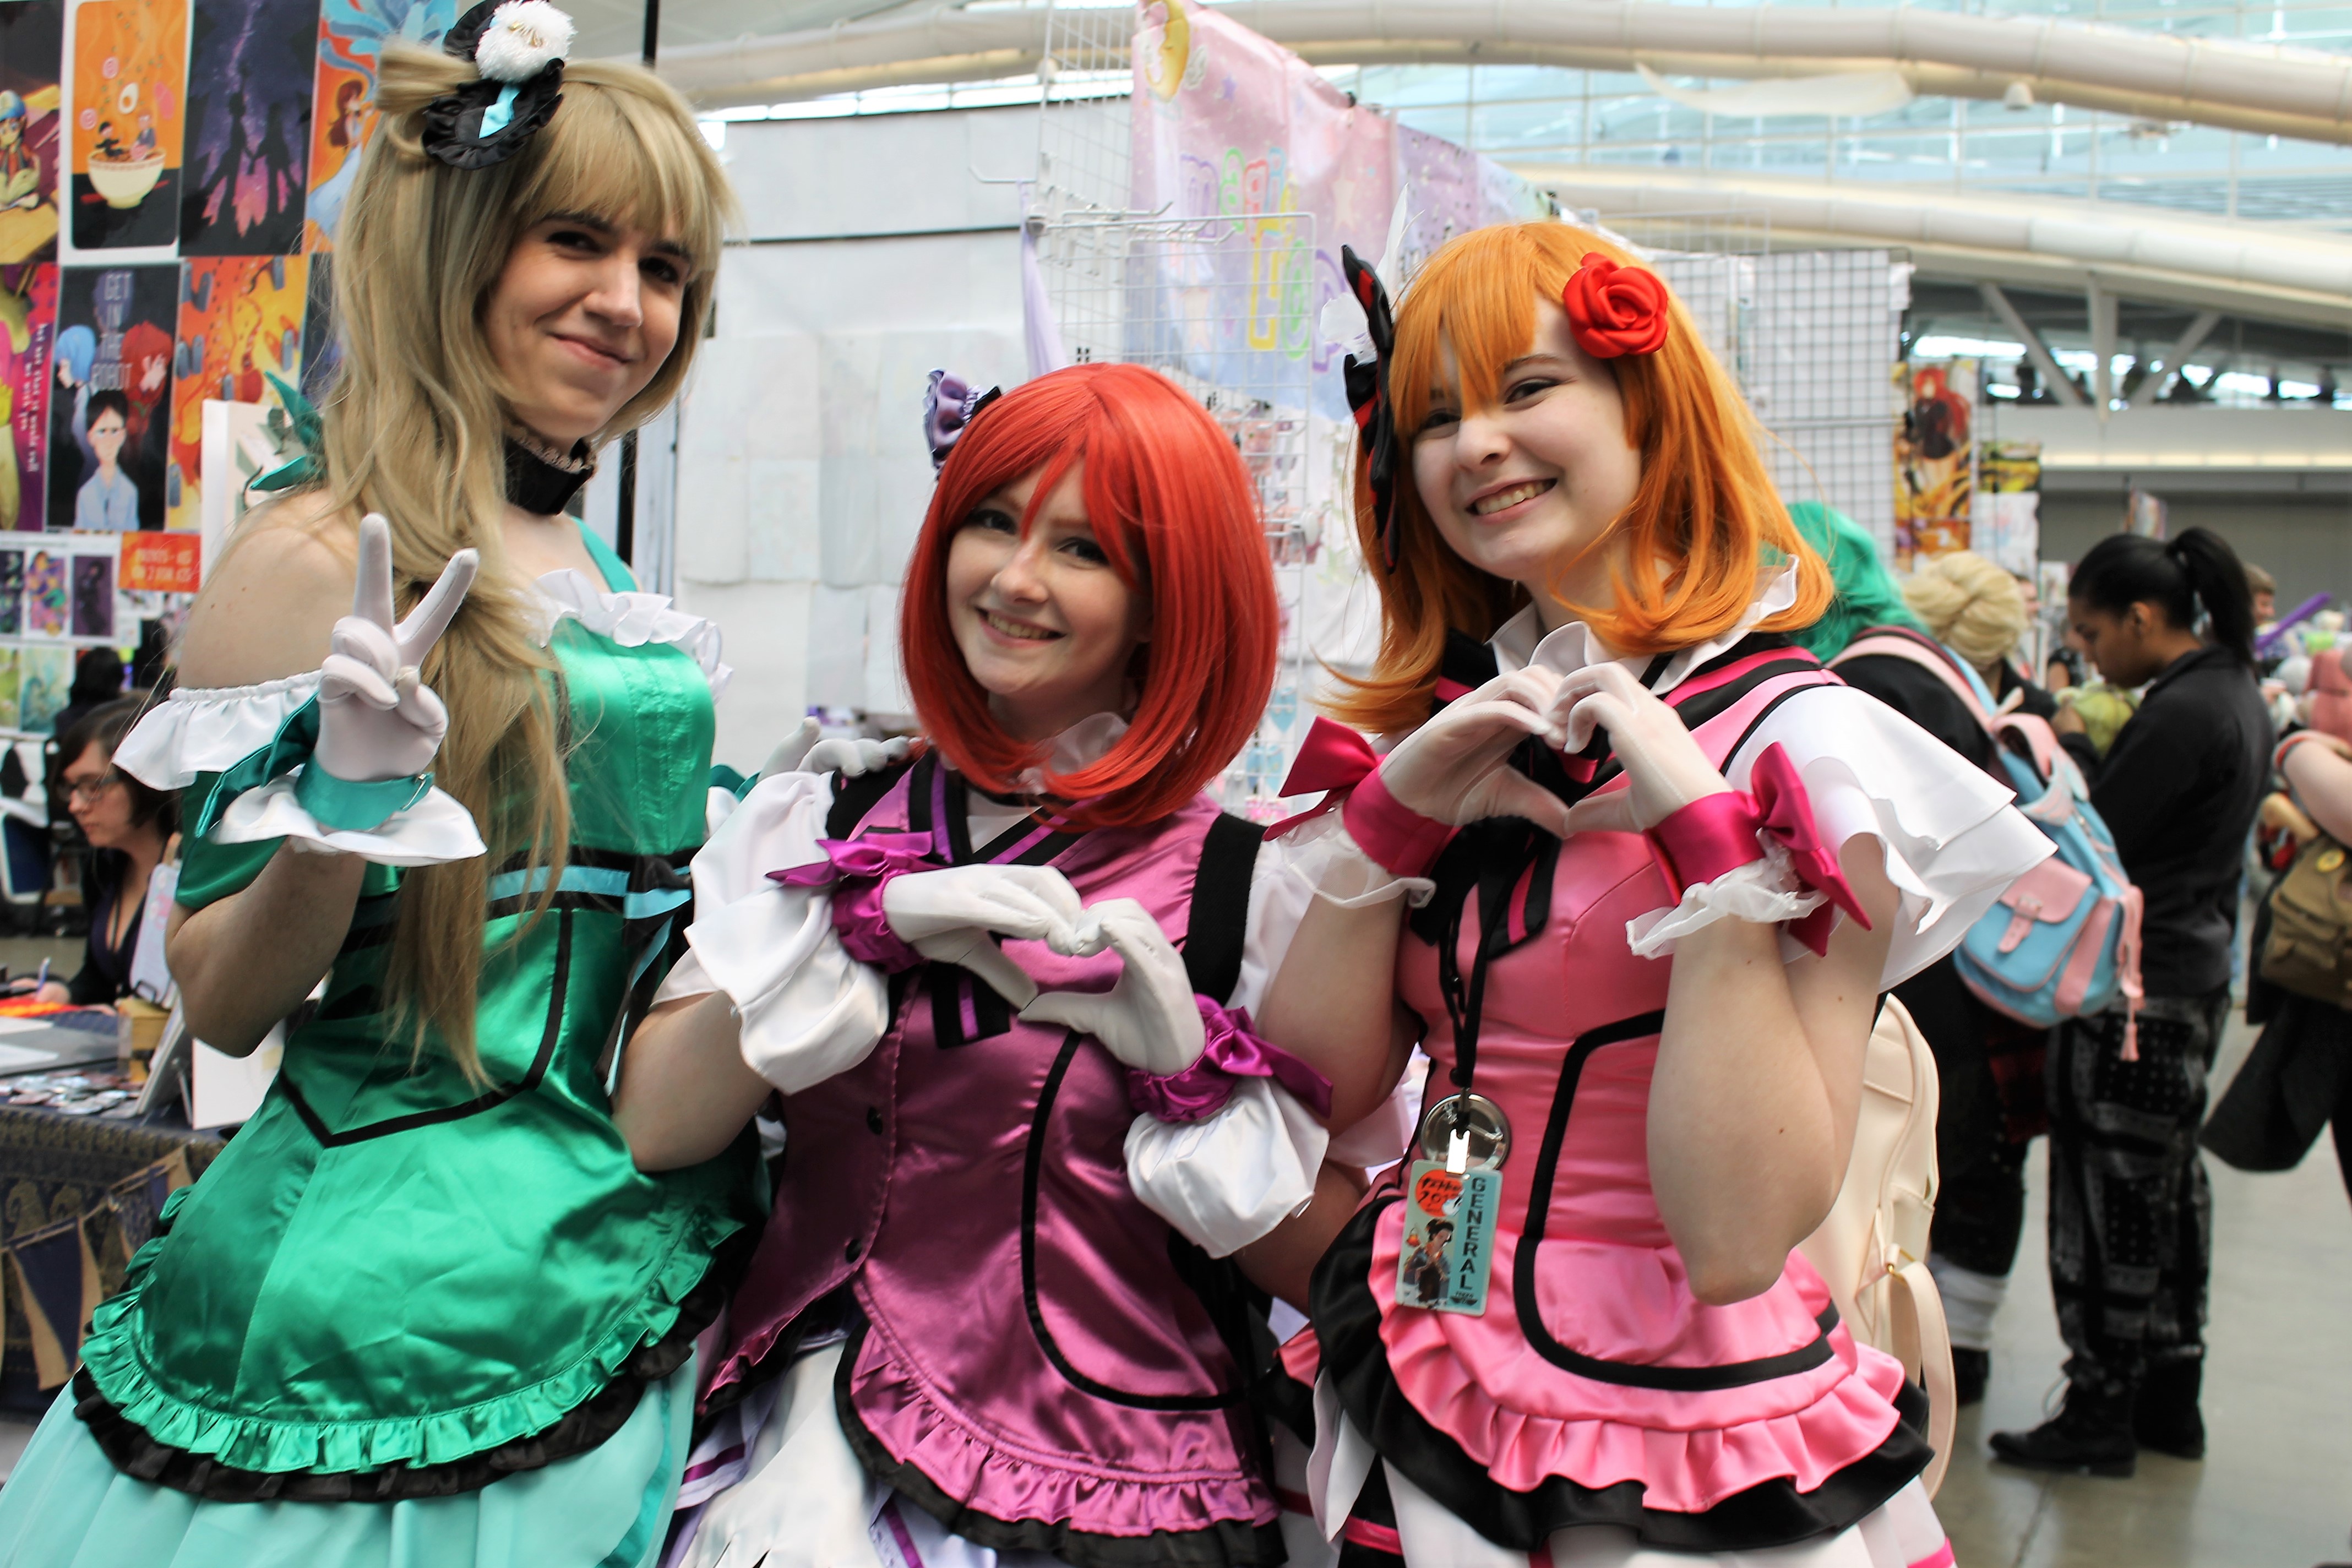 Top more than 135 new orleans anime conventions - highschoolcanada.edu.vn